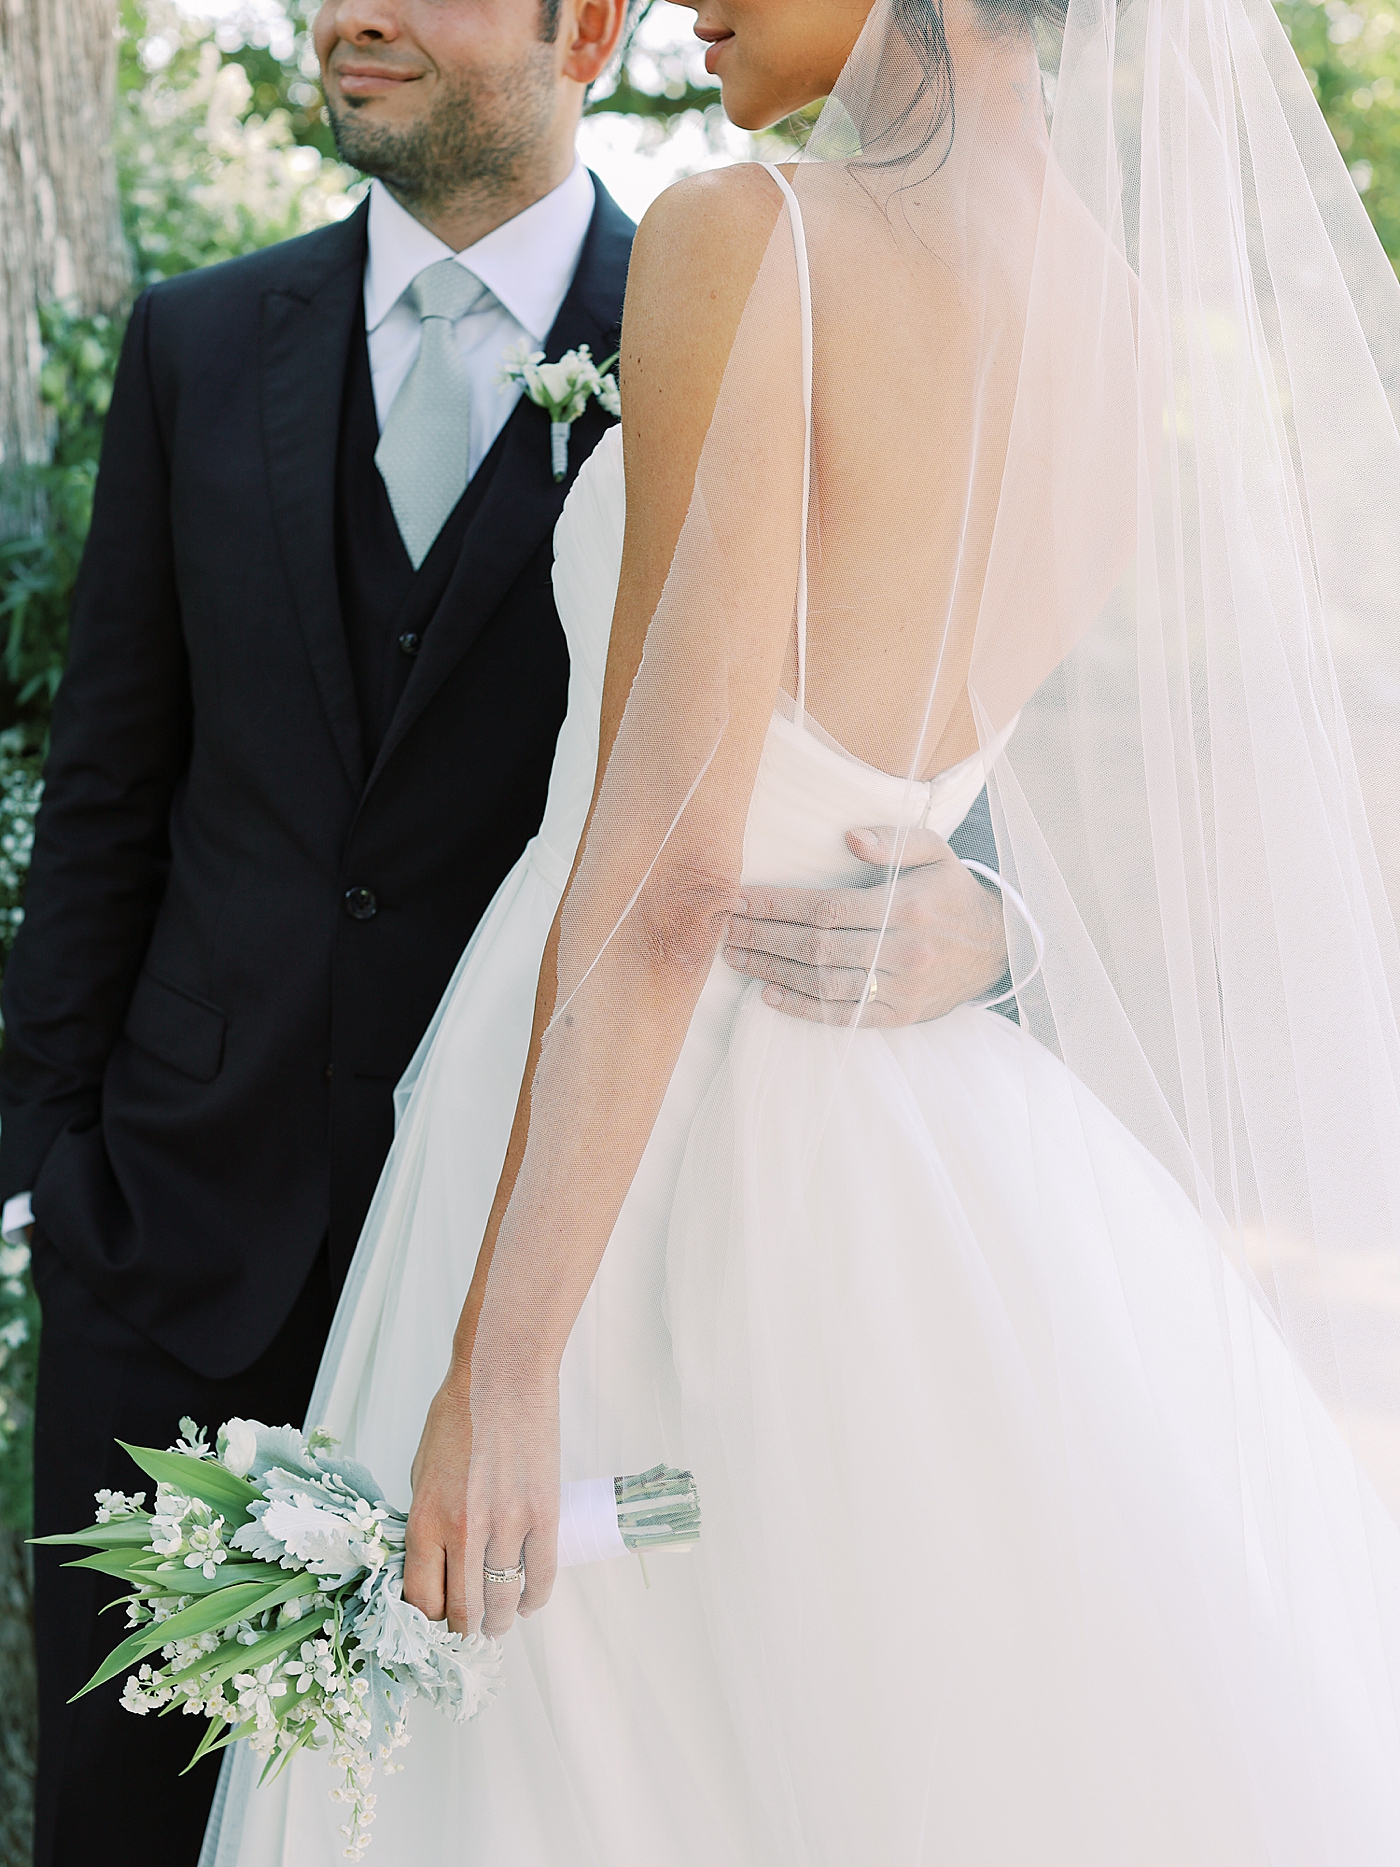 Detail of grooms hand around brides waist | Image by Diane Sotero Photography